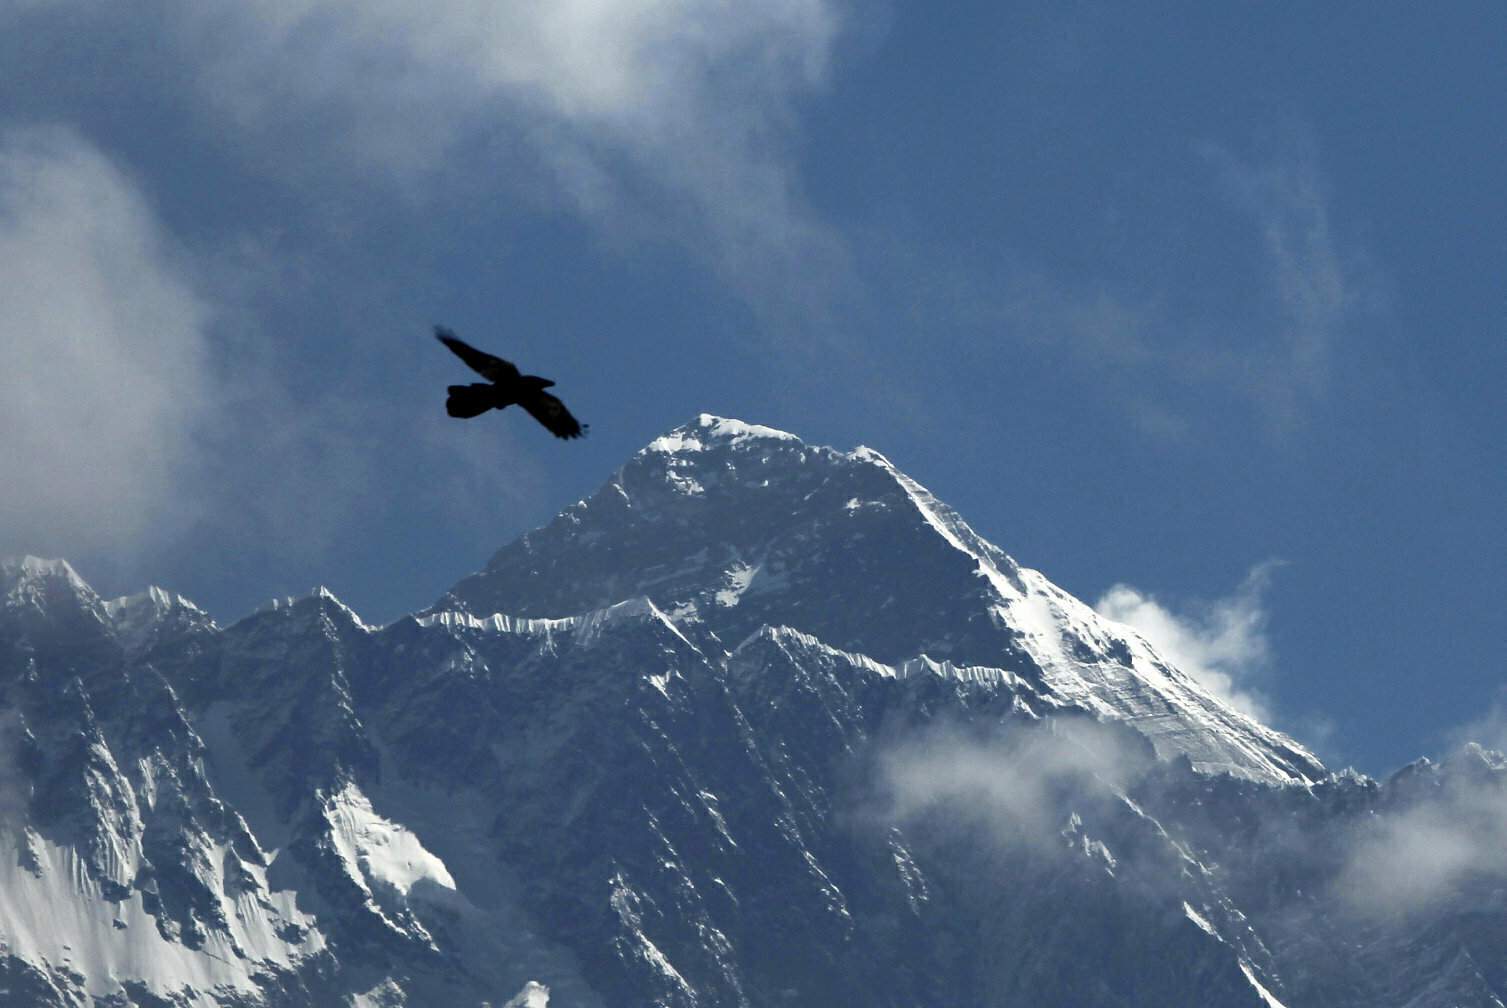 EXPLAINER: Why did Mount Everest’s height change?